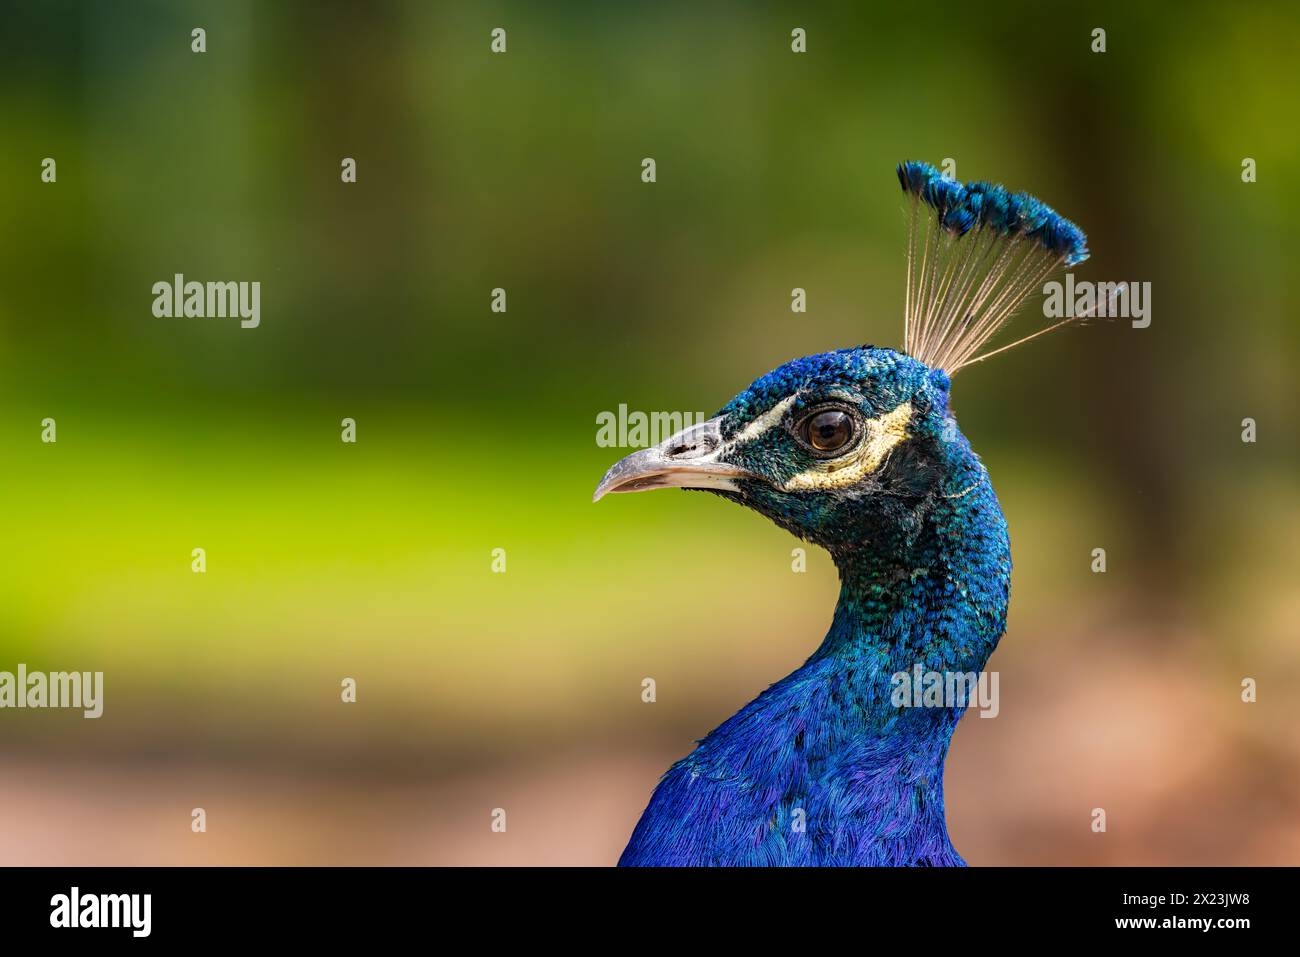 Blue peacock with a striking blue shimmering neck and head with a crown of feathers isolated in nature, Germany Stock Photo